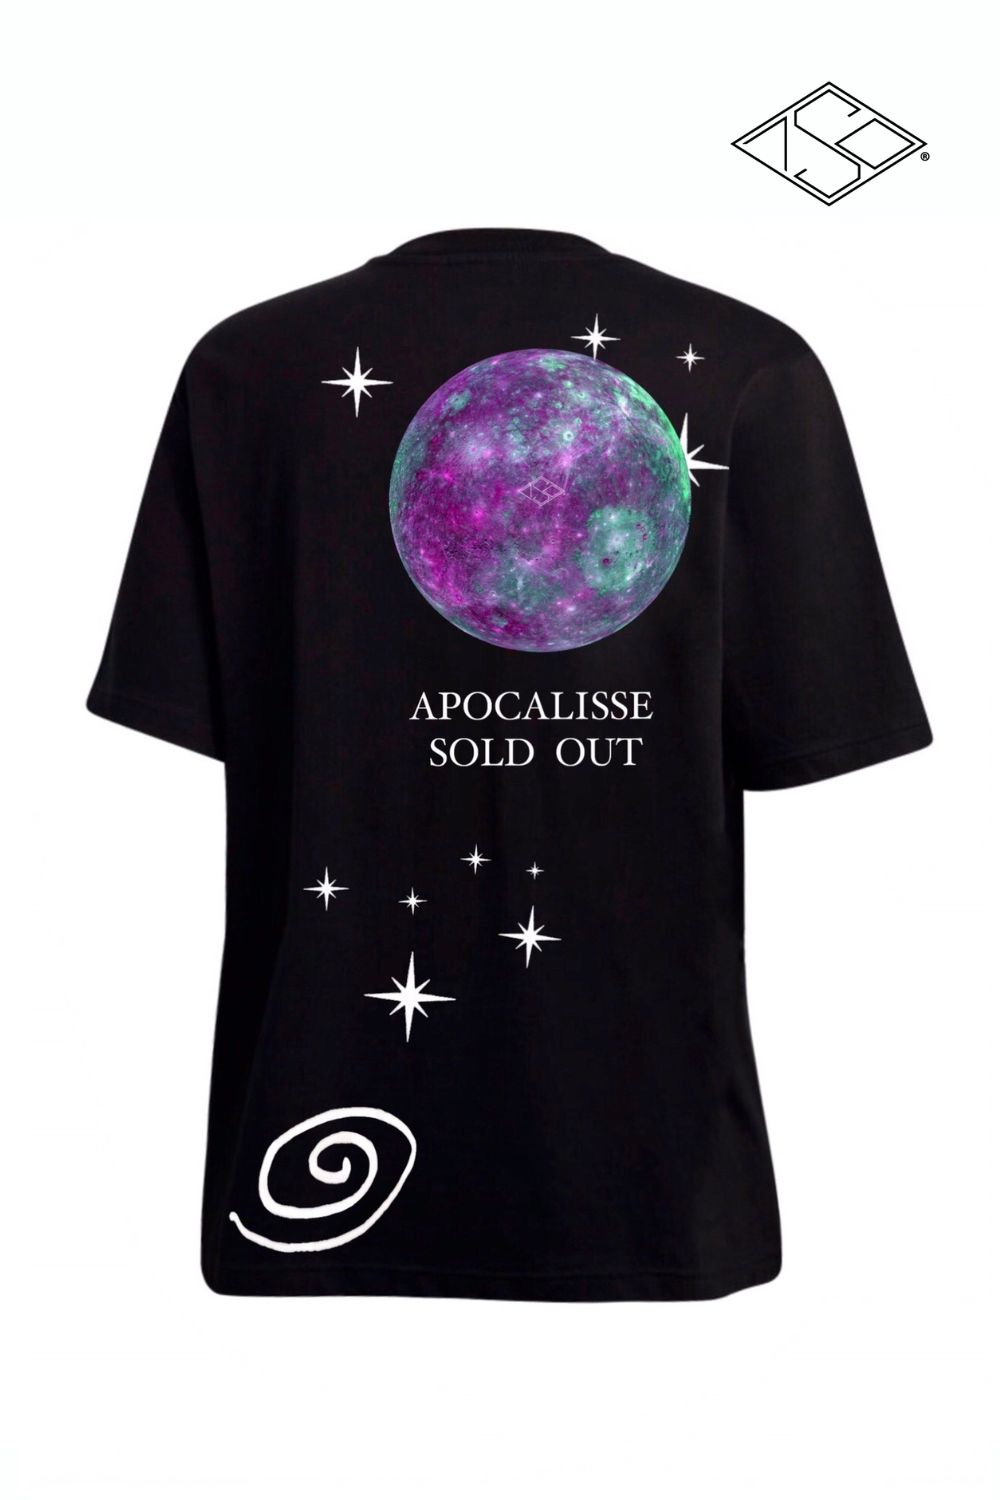 tshirt Apocalisse TOP Tee from the STARS by ApocalisseSoldOut® Fashion Brand